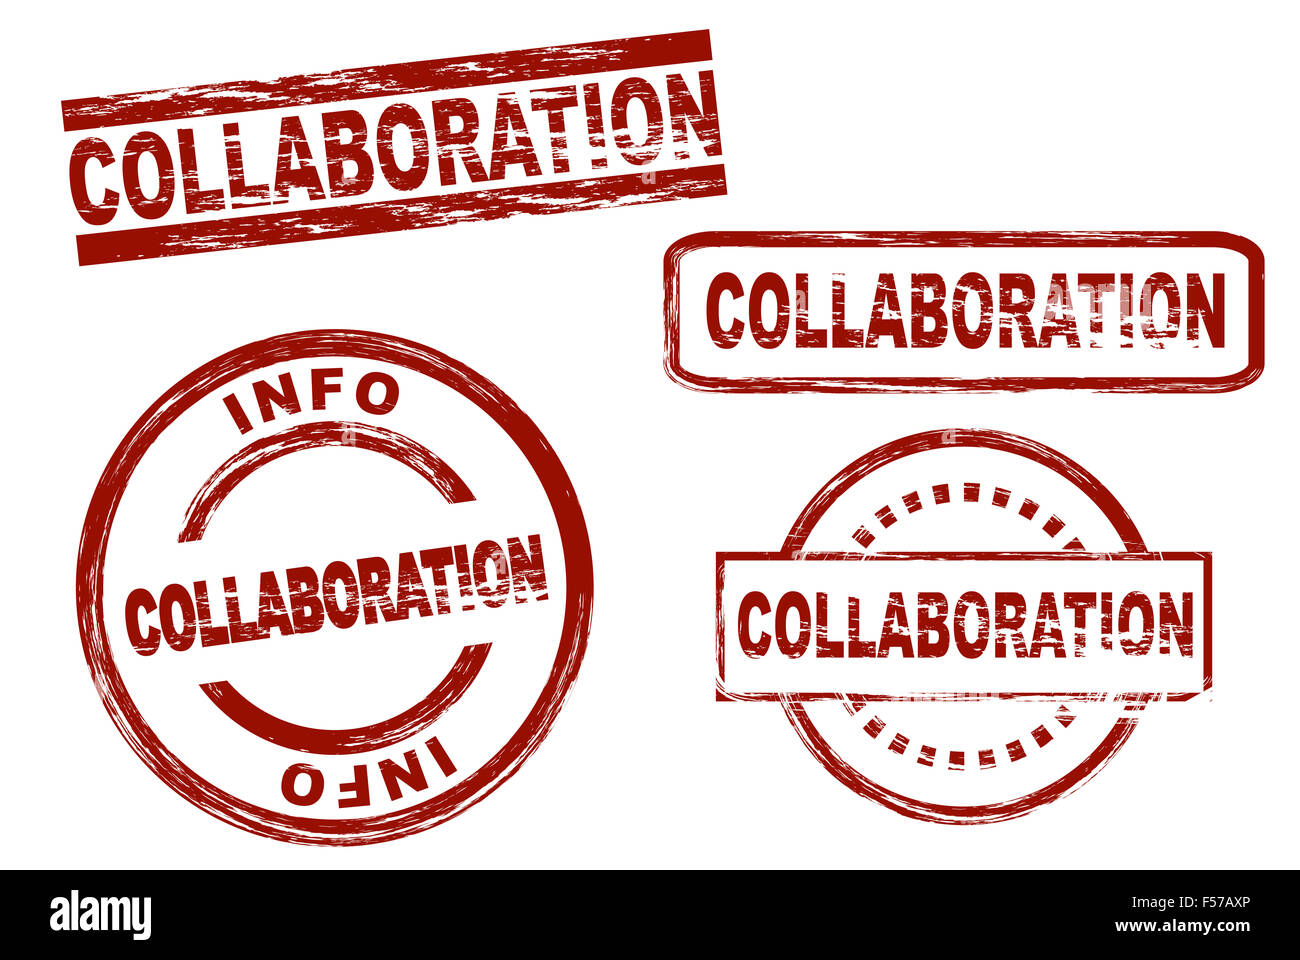 Set of stylized stamps showing the term collaboration. All on white background. Stock Photo